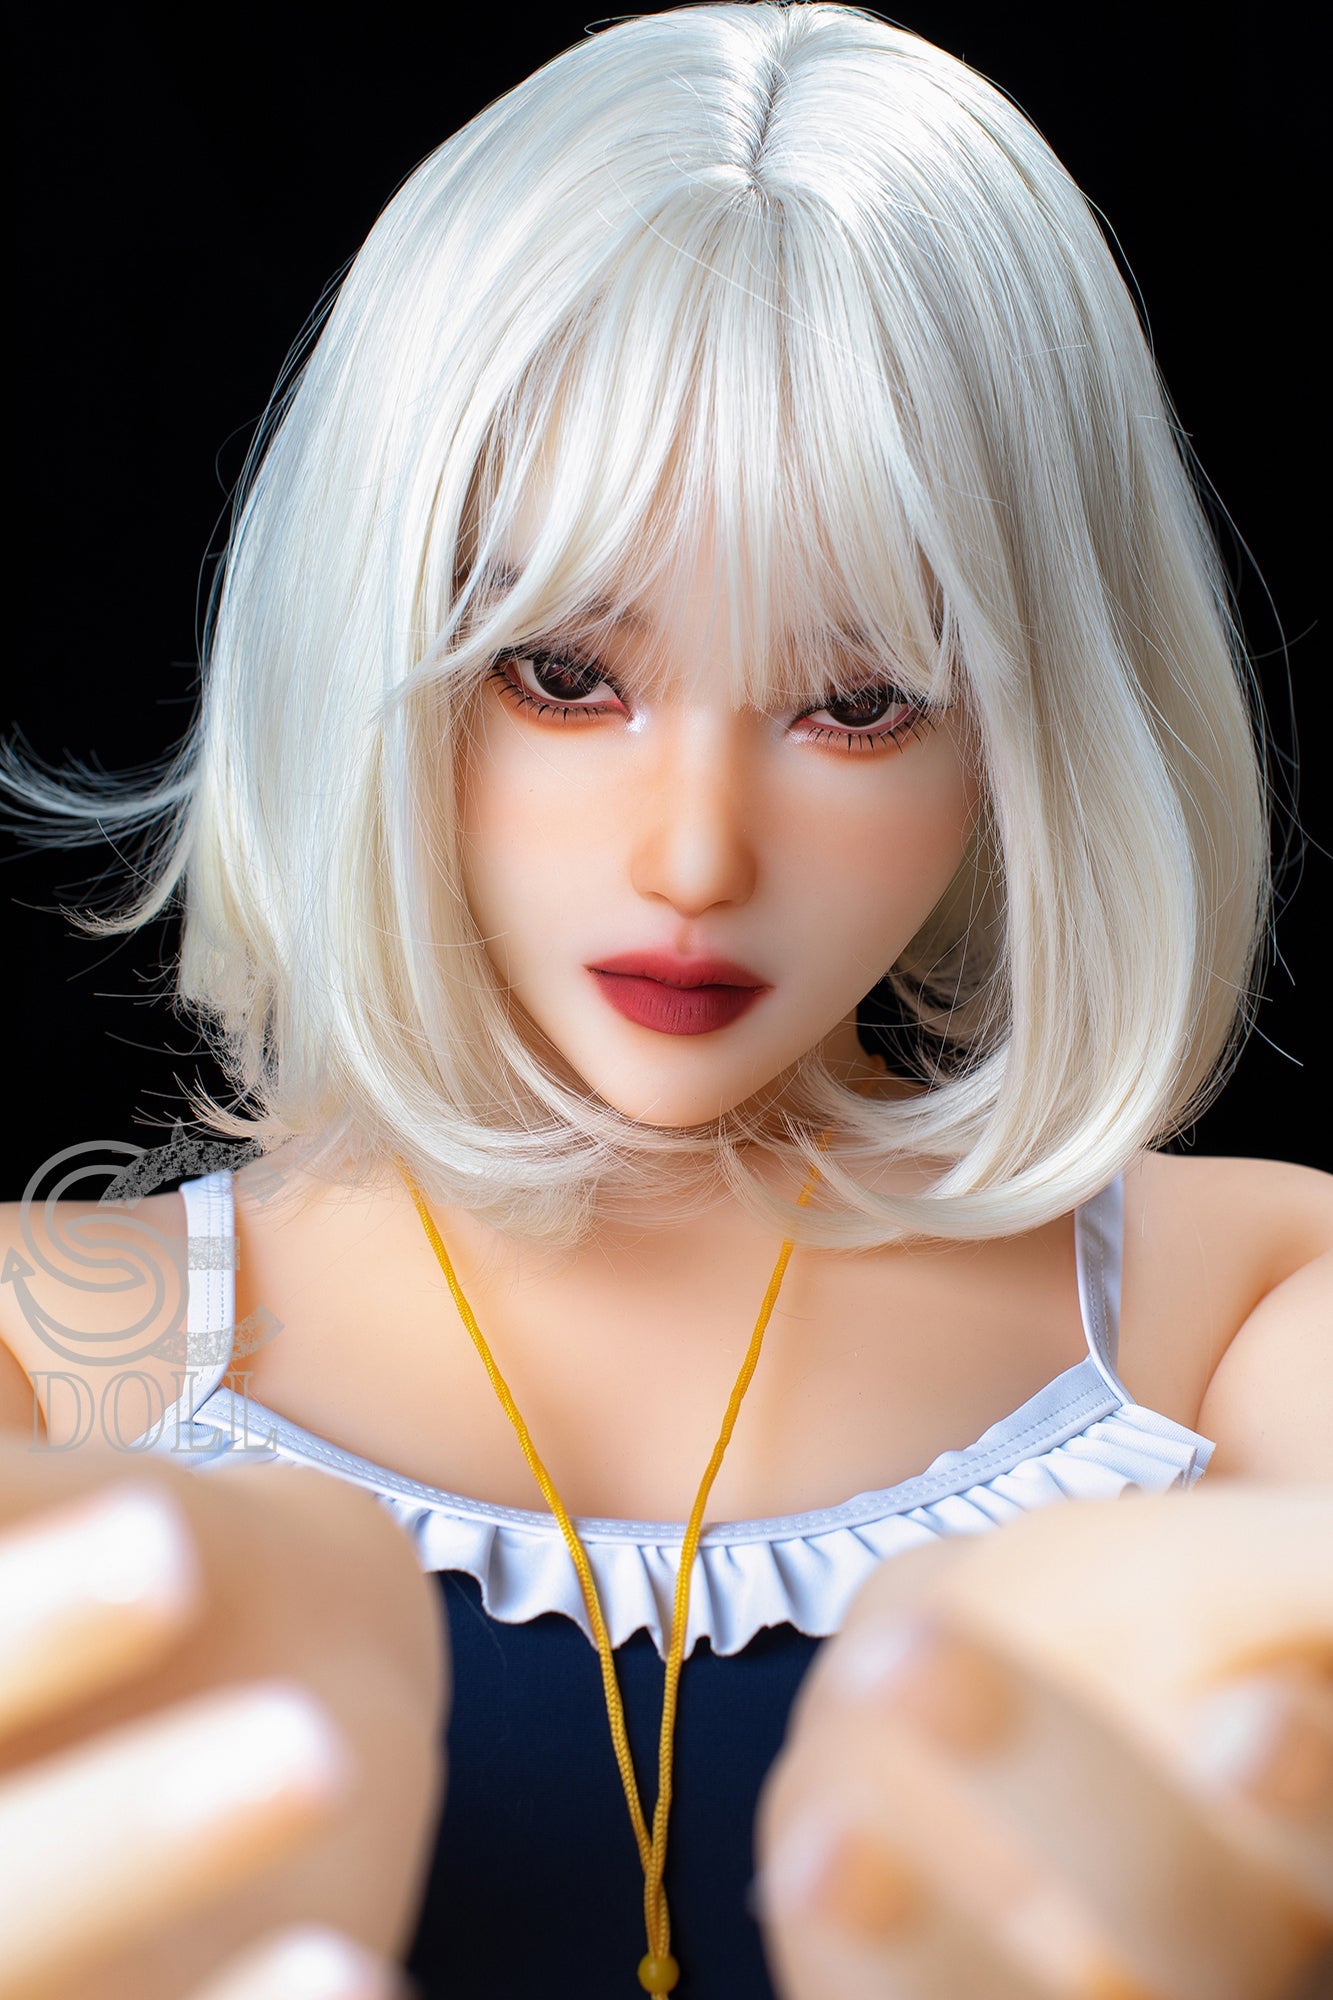 SE Doll - 163 cm E Cup TPE Doll - Mikoto (5ft 4in) - Love Dolls 4U